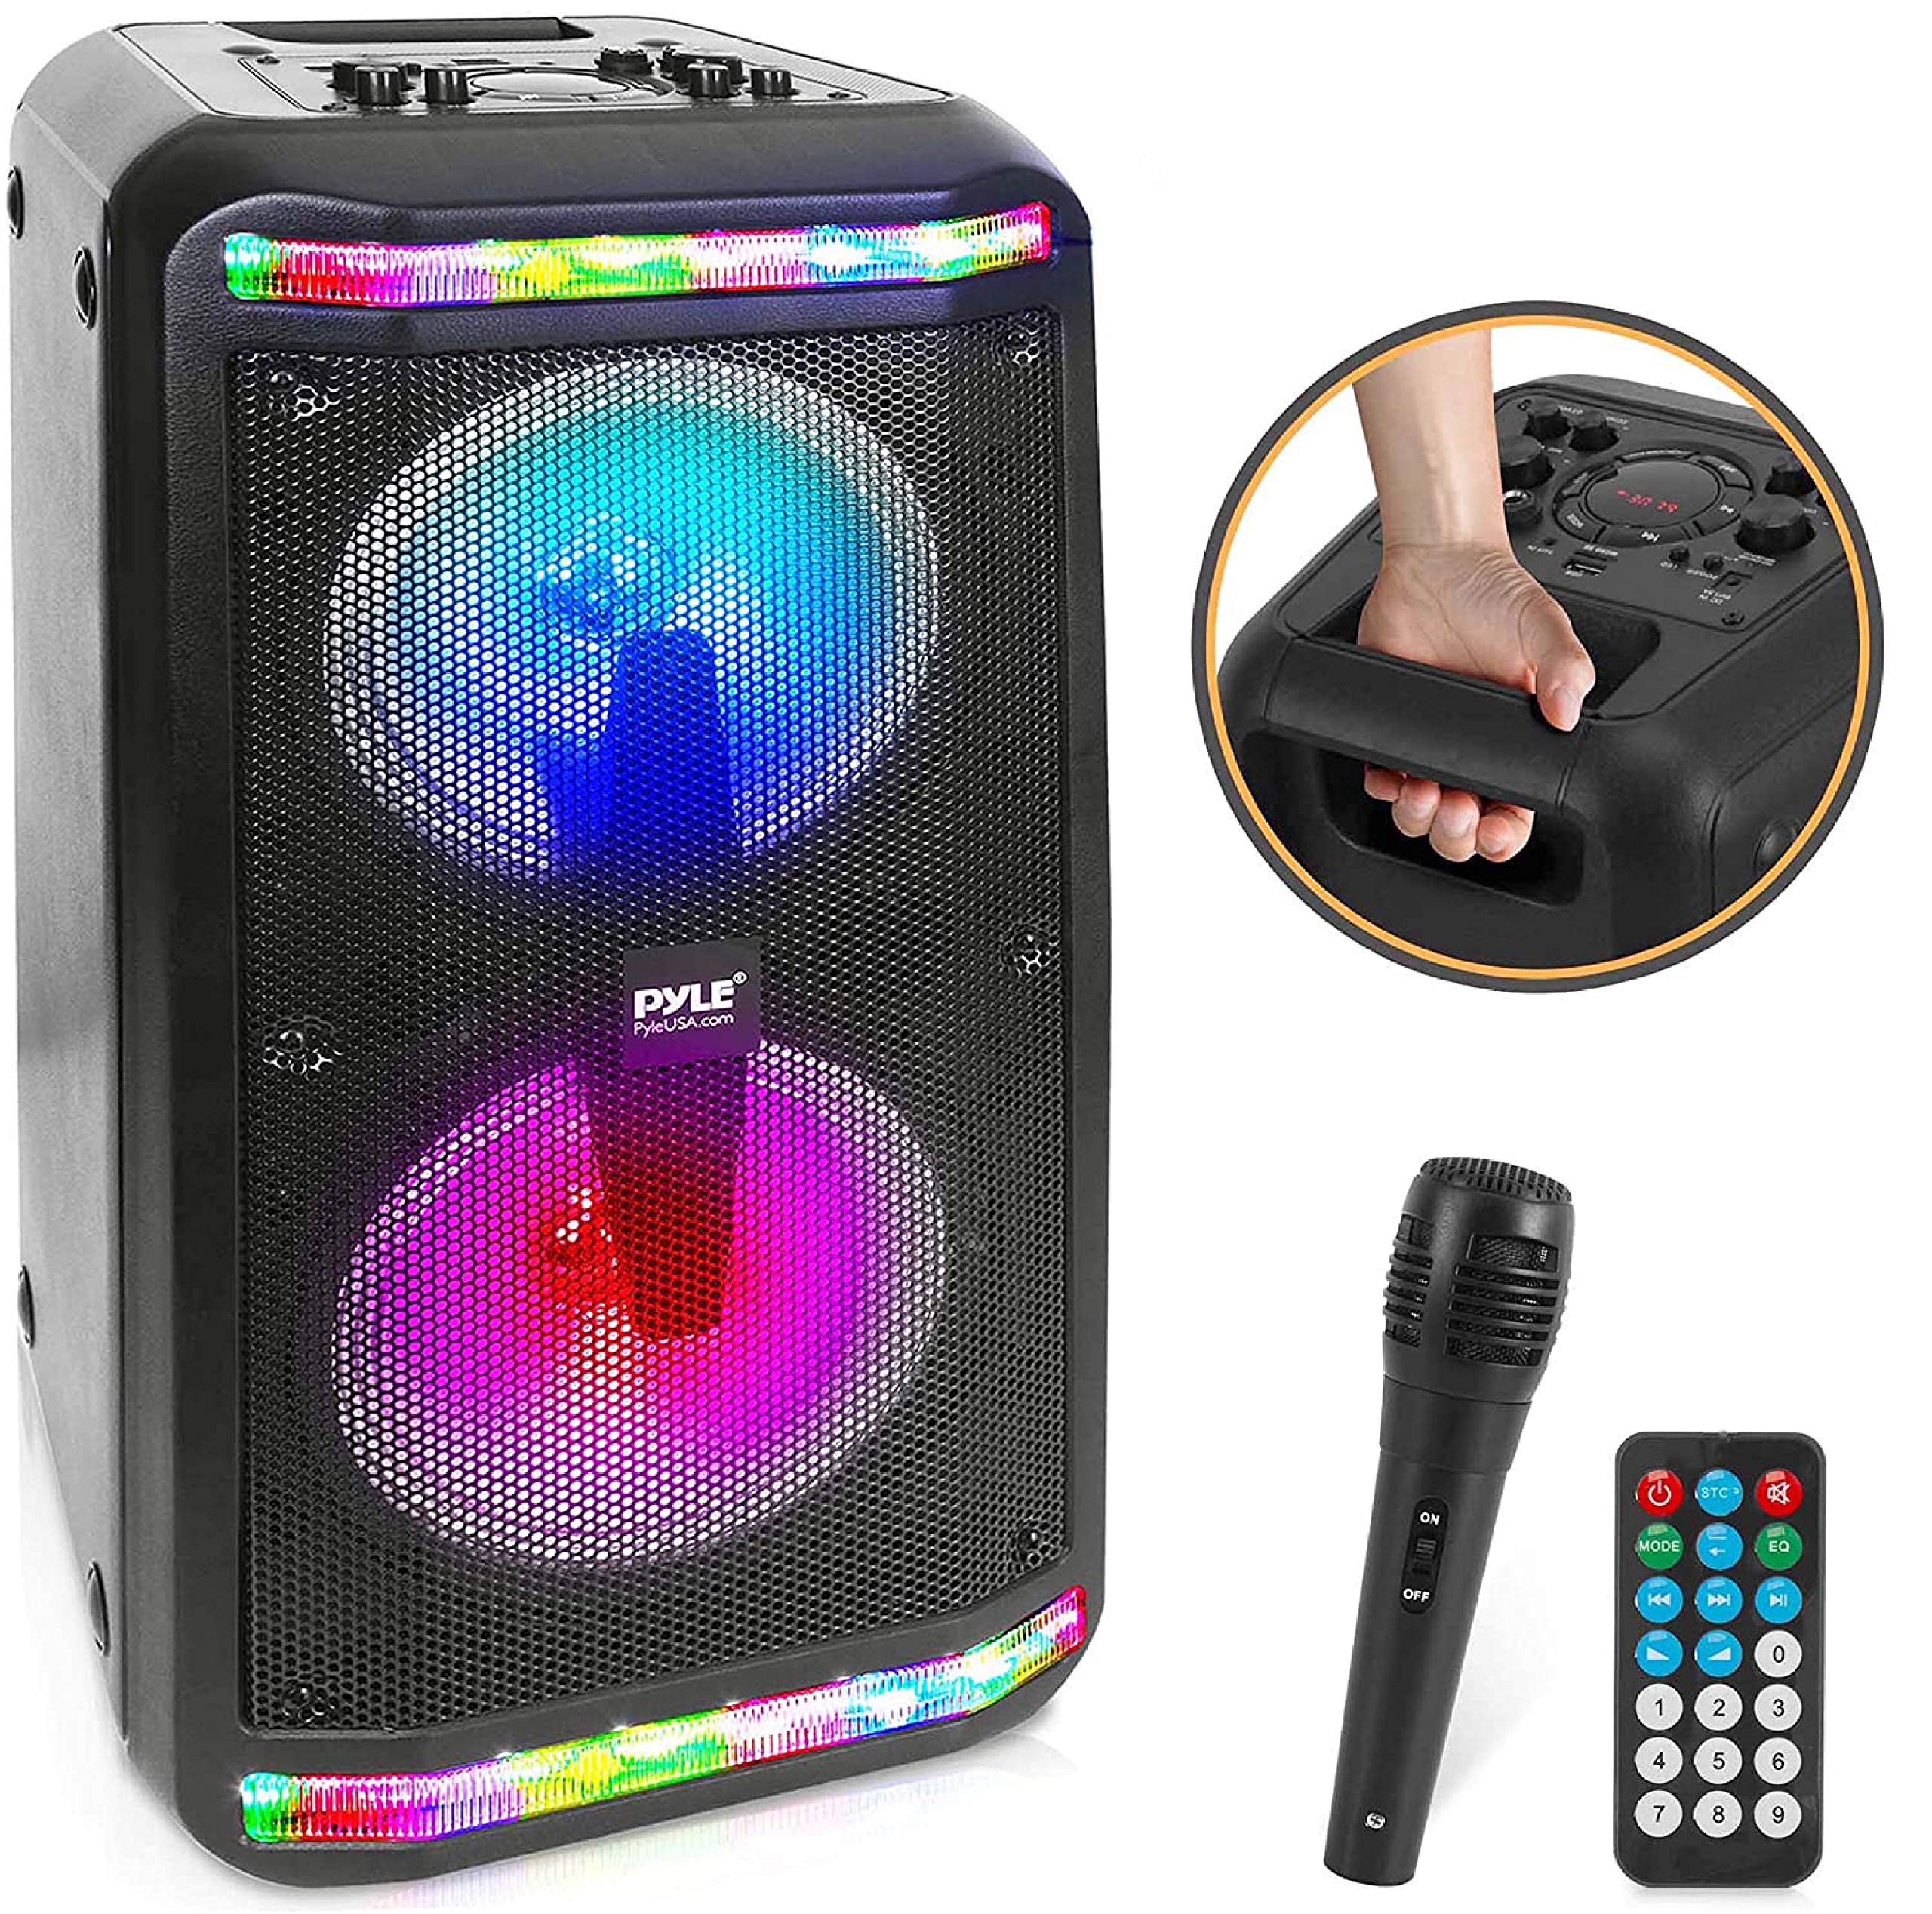 Pyle Bluetooth Speaker & Microphone System - Portable Stereo Karaoke Speaker with Wired Mic, Built-in LED Party Lights, MP3/USB, FM Radio (6.5’’ Subwoofers, 500 Watt MAX) (PPHP266B.5)